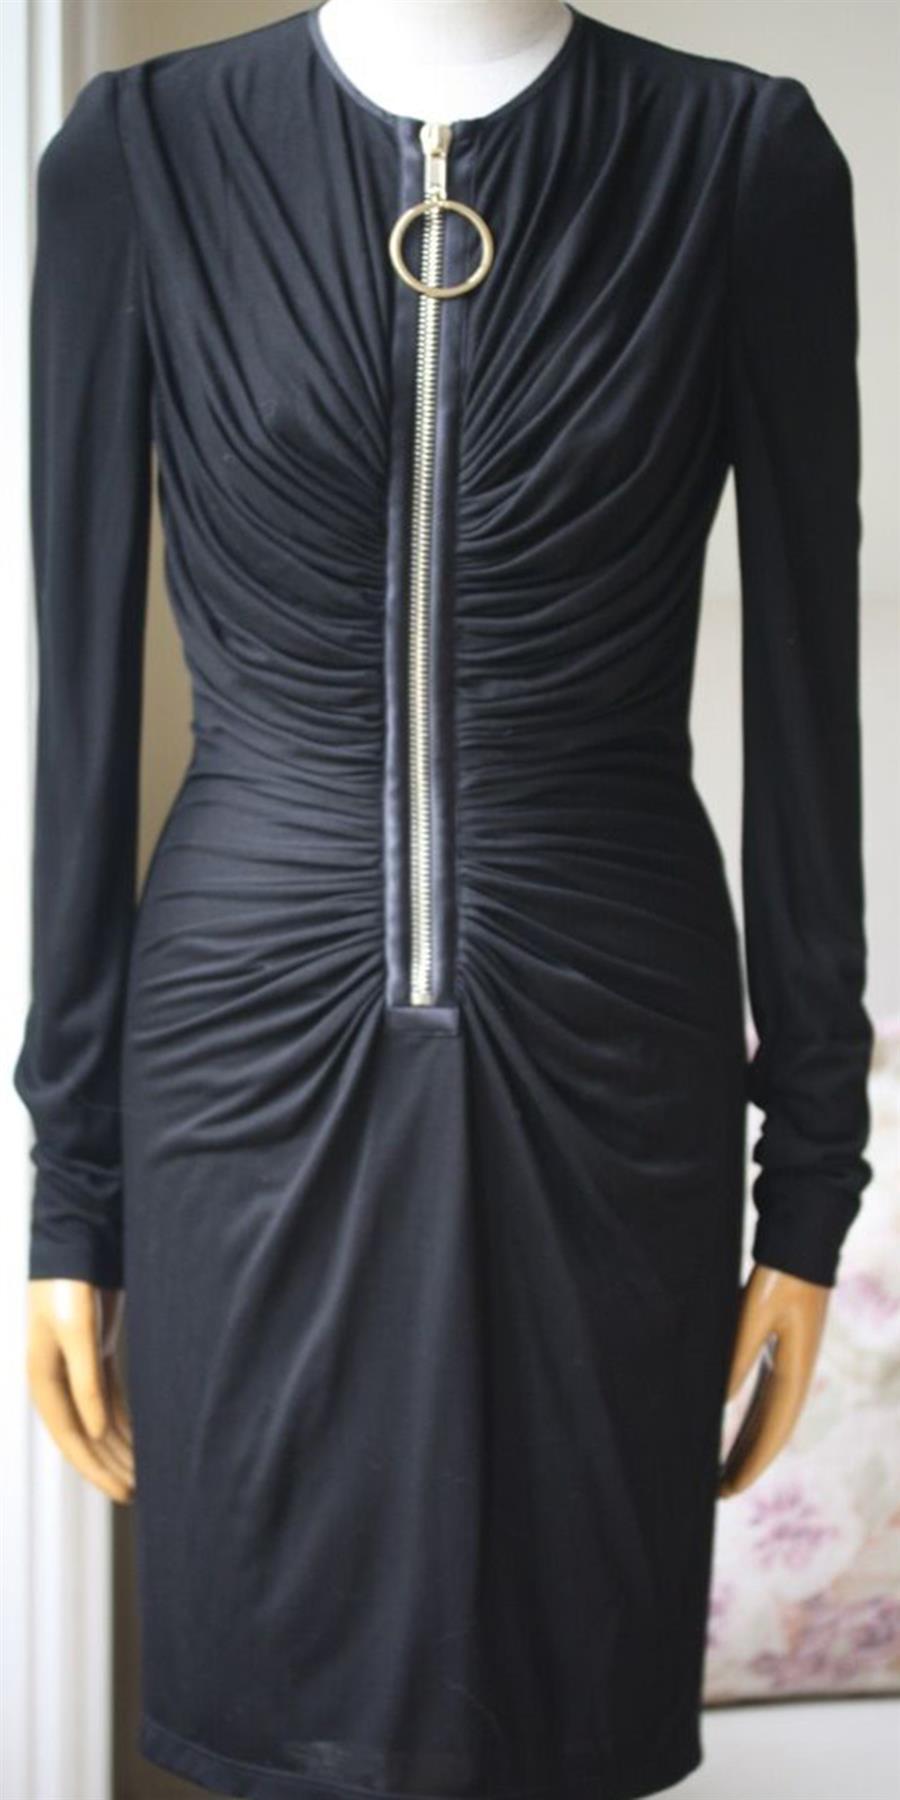 This black jersey dress by Givenchy is comfortable and lightweight, featuring elegant drape detailing around the bust and waist that flawlessly flatters the figure. Black jersey. Concealed zip fastening at back. 85% Viscose, 15% silk; fabric2: 100%